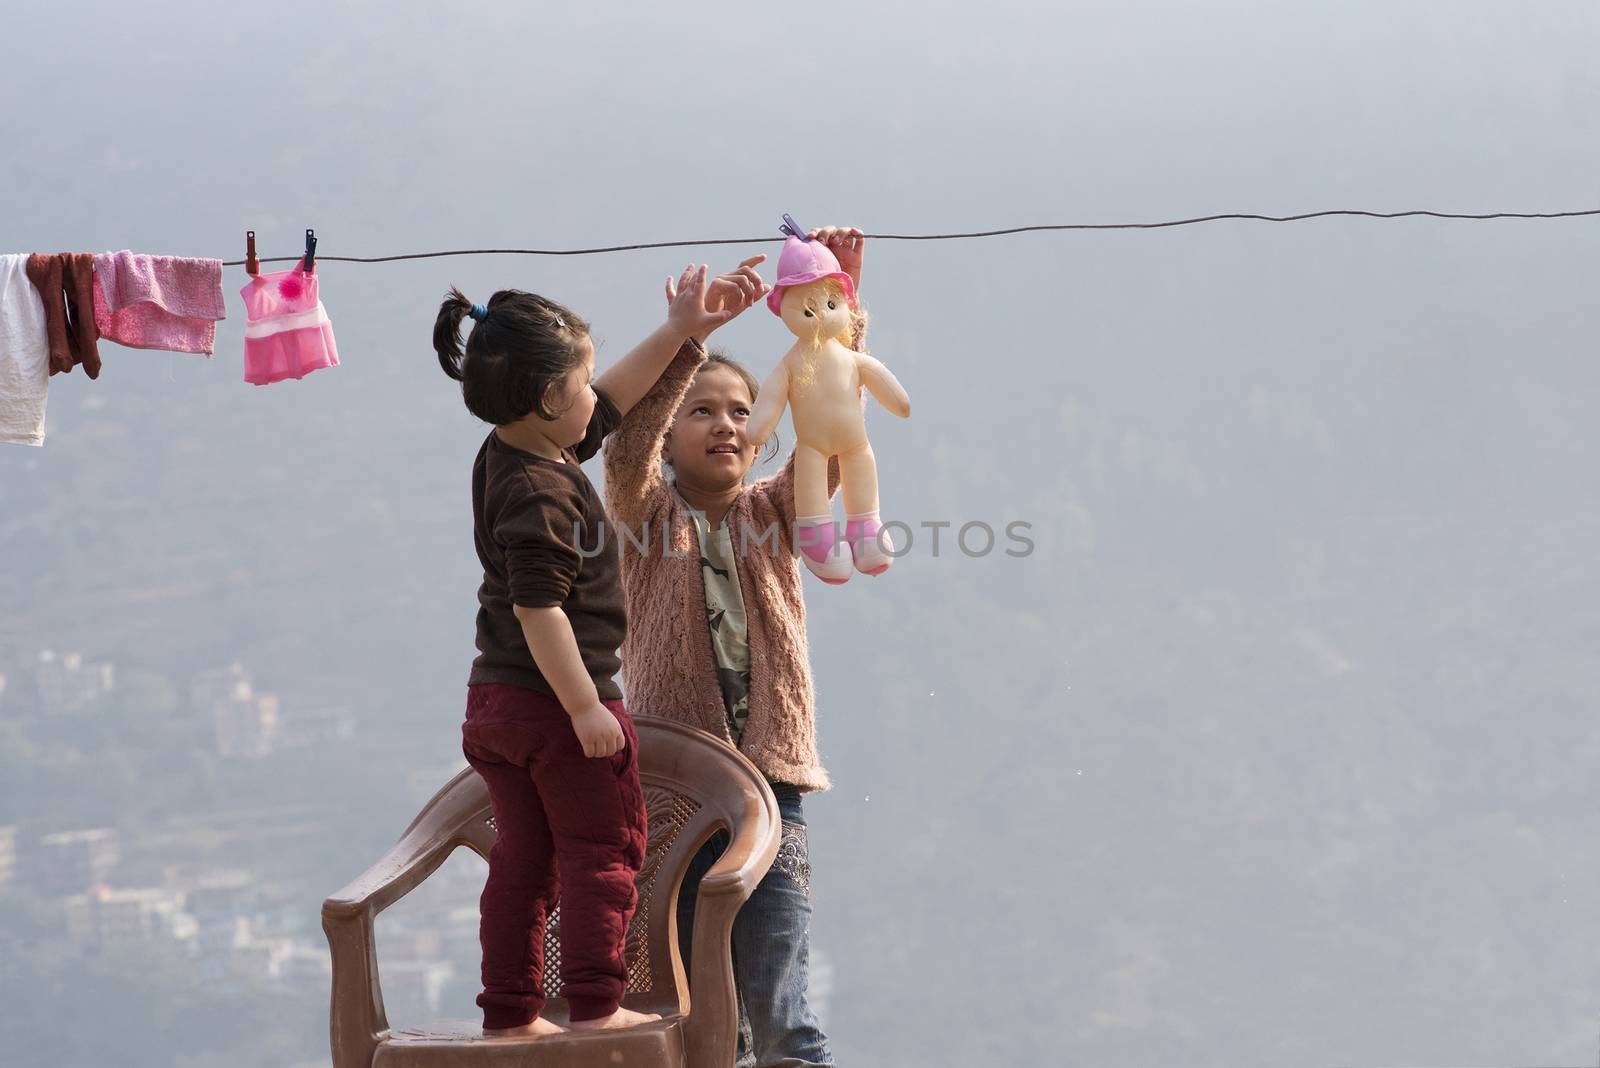 Kids wash their dolls and hang them out to dry on the clothesline. Children doing laundry and playing outdoors.